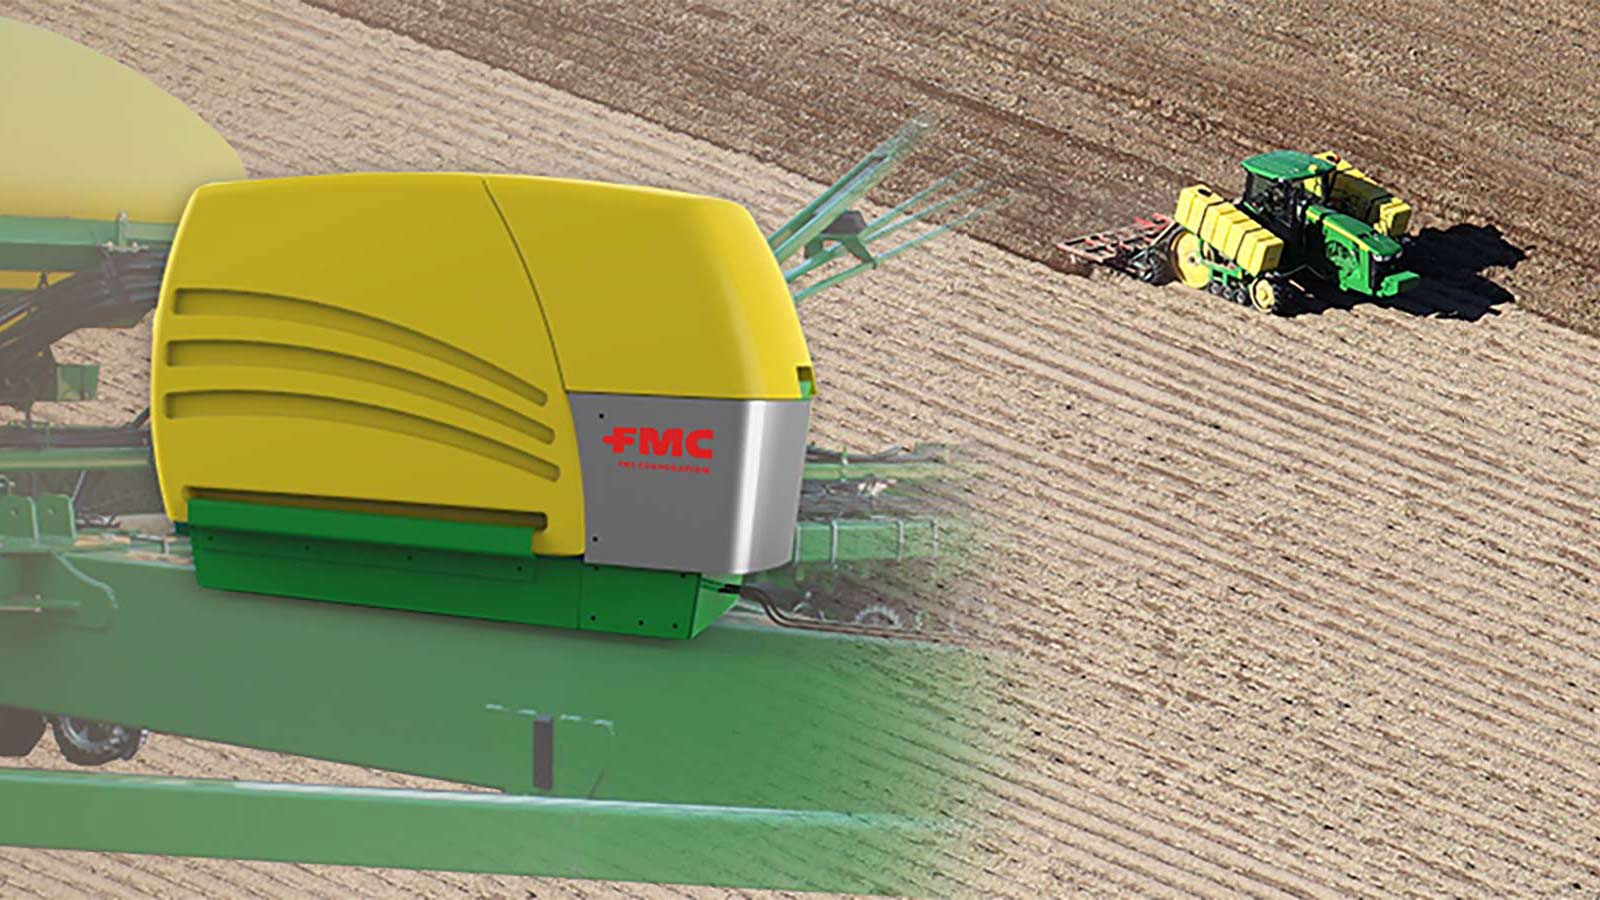 FMC 3RIVE 3D Crop Protection System